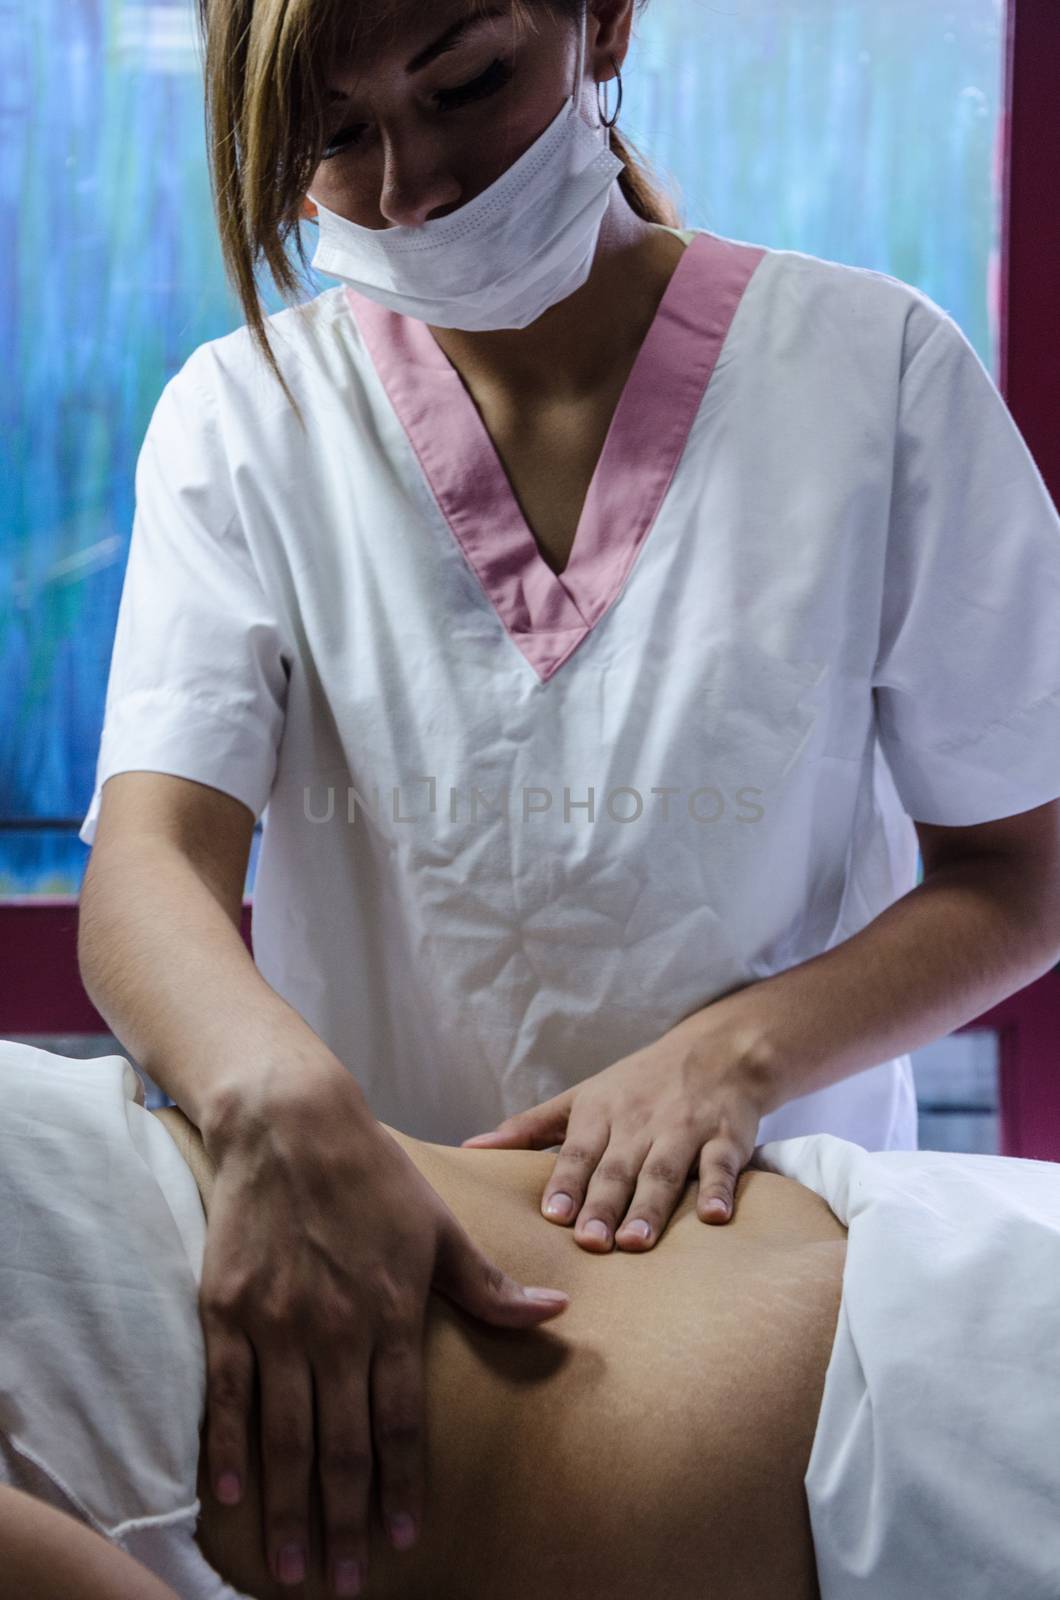 Cosmiatra performing reducing massages to a patient